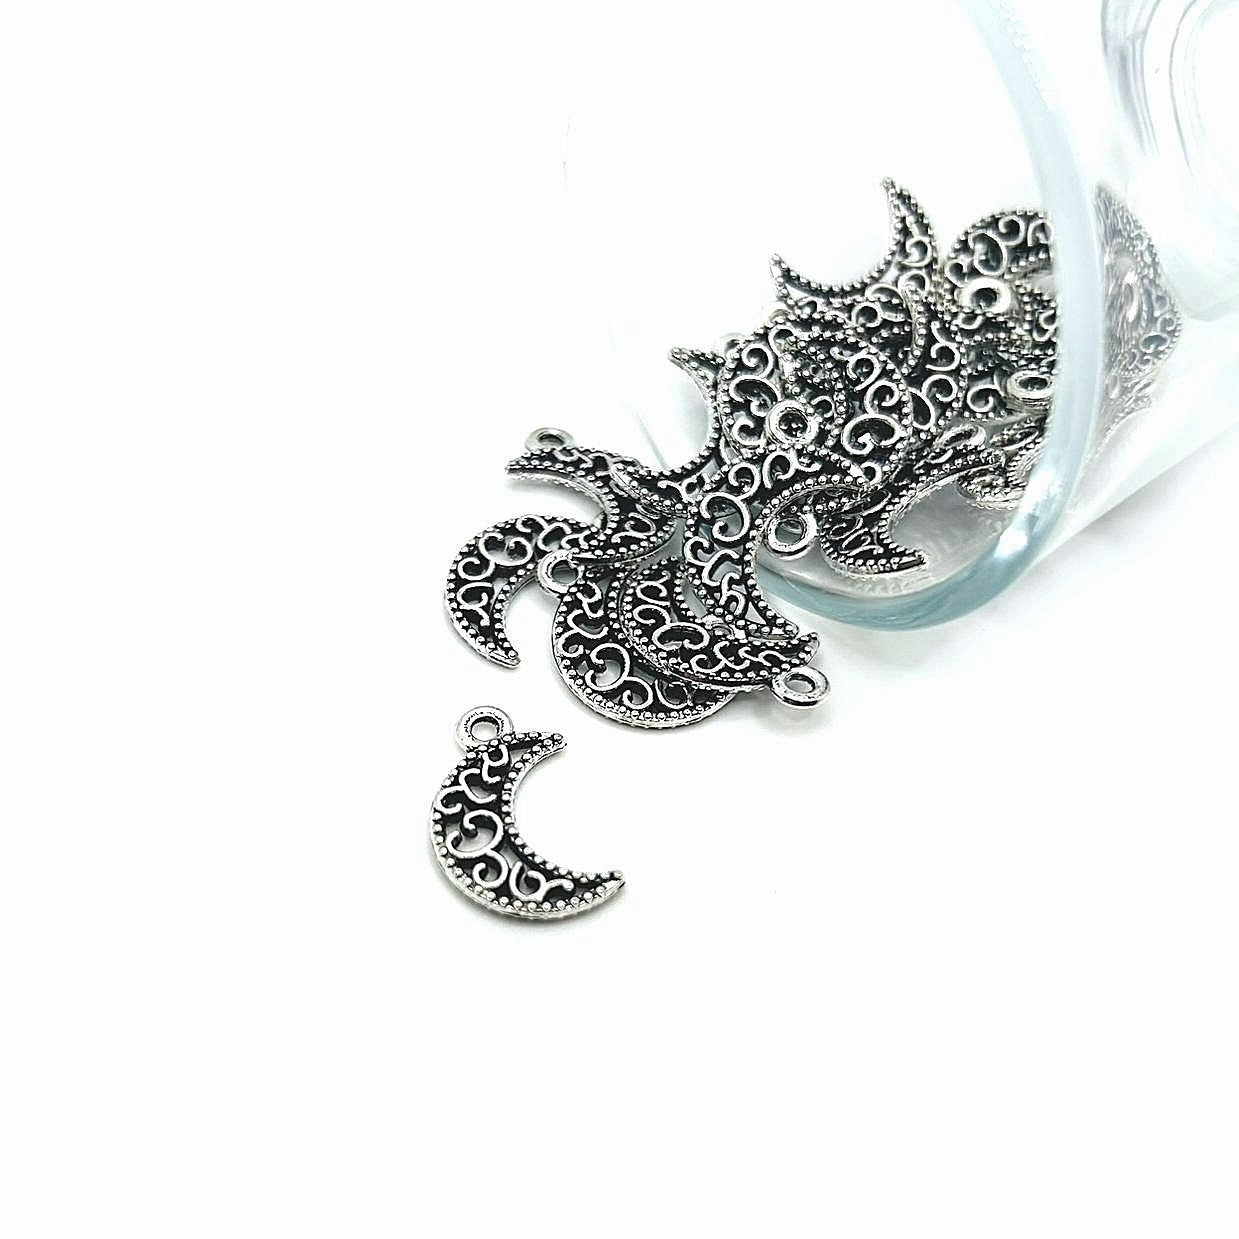 4, 20 or 50 Pieces: Silver Filigree Crescent Moon Charms - Double Sided